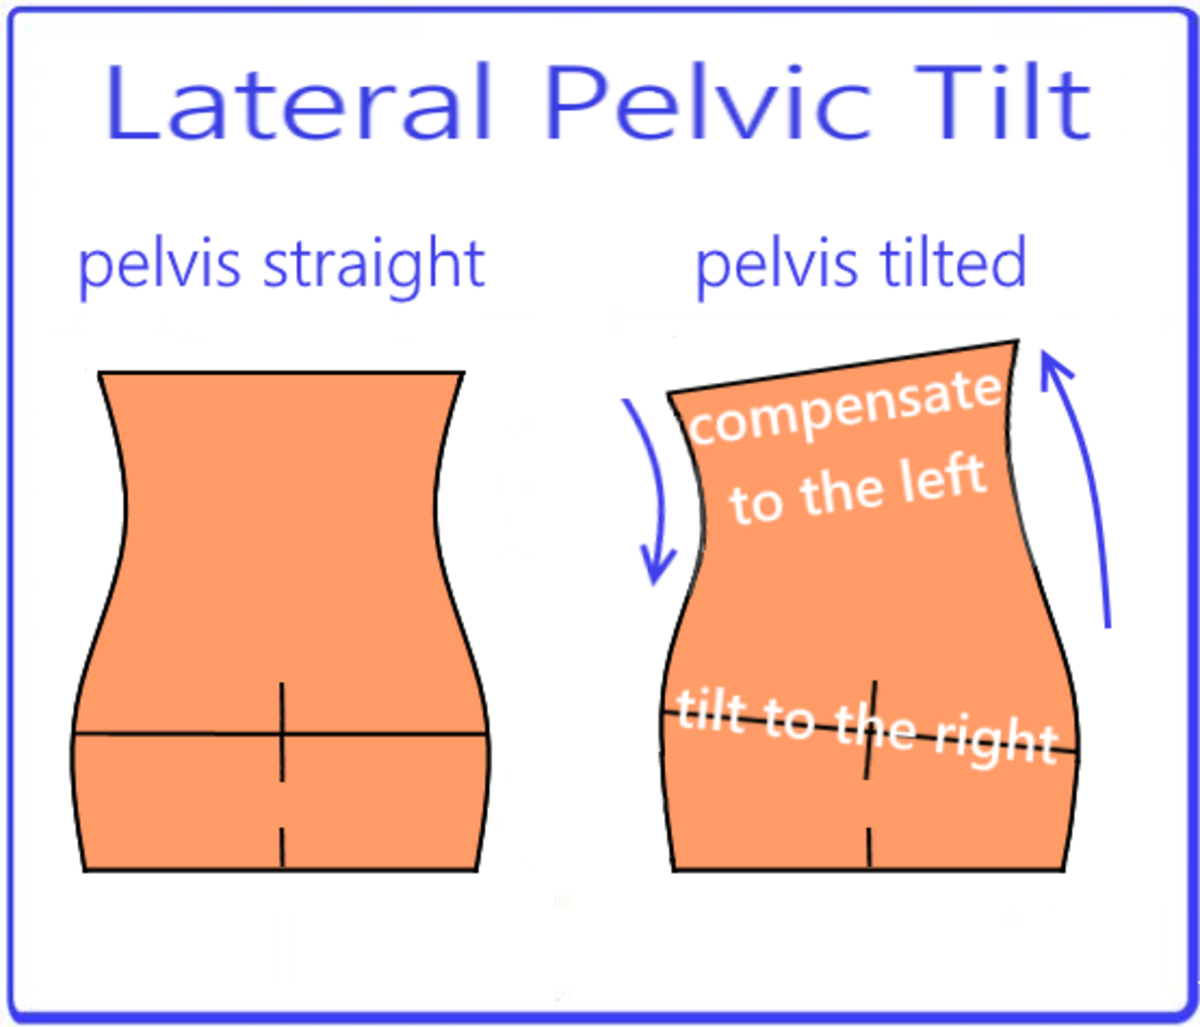 Habitually carrying the body weight in standing on one leg and always on the same leg, can cause a lateral pelvic tilt.